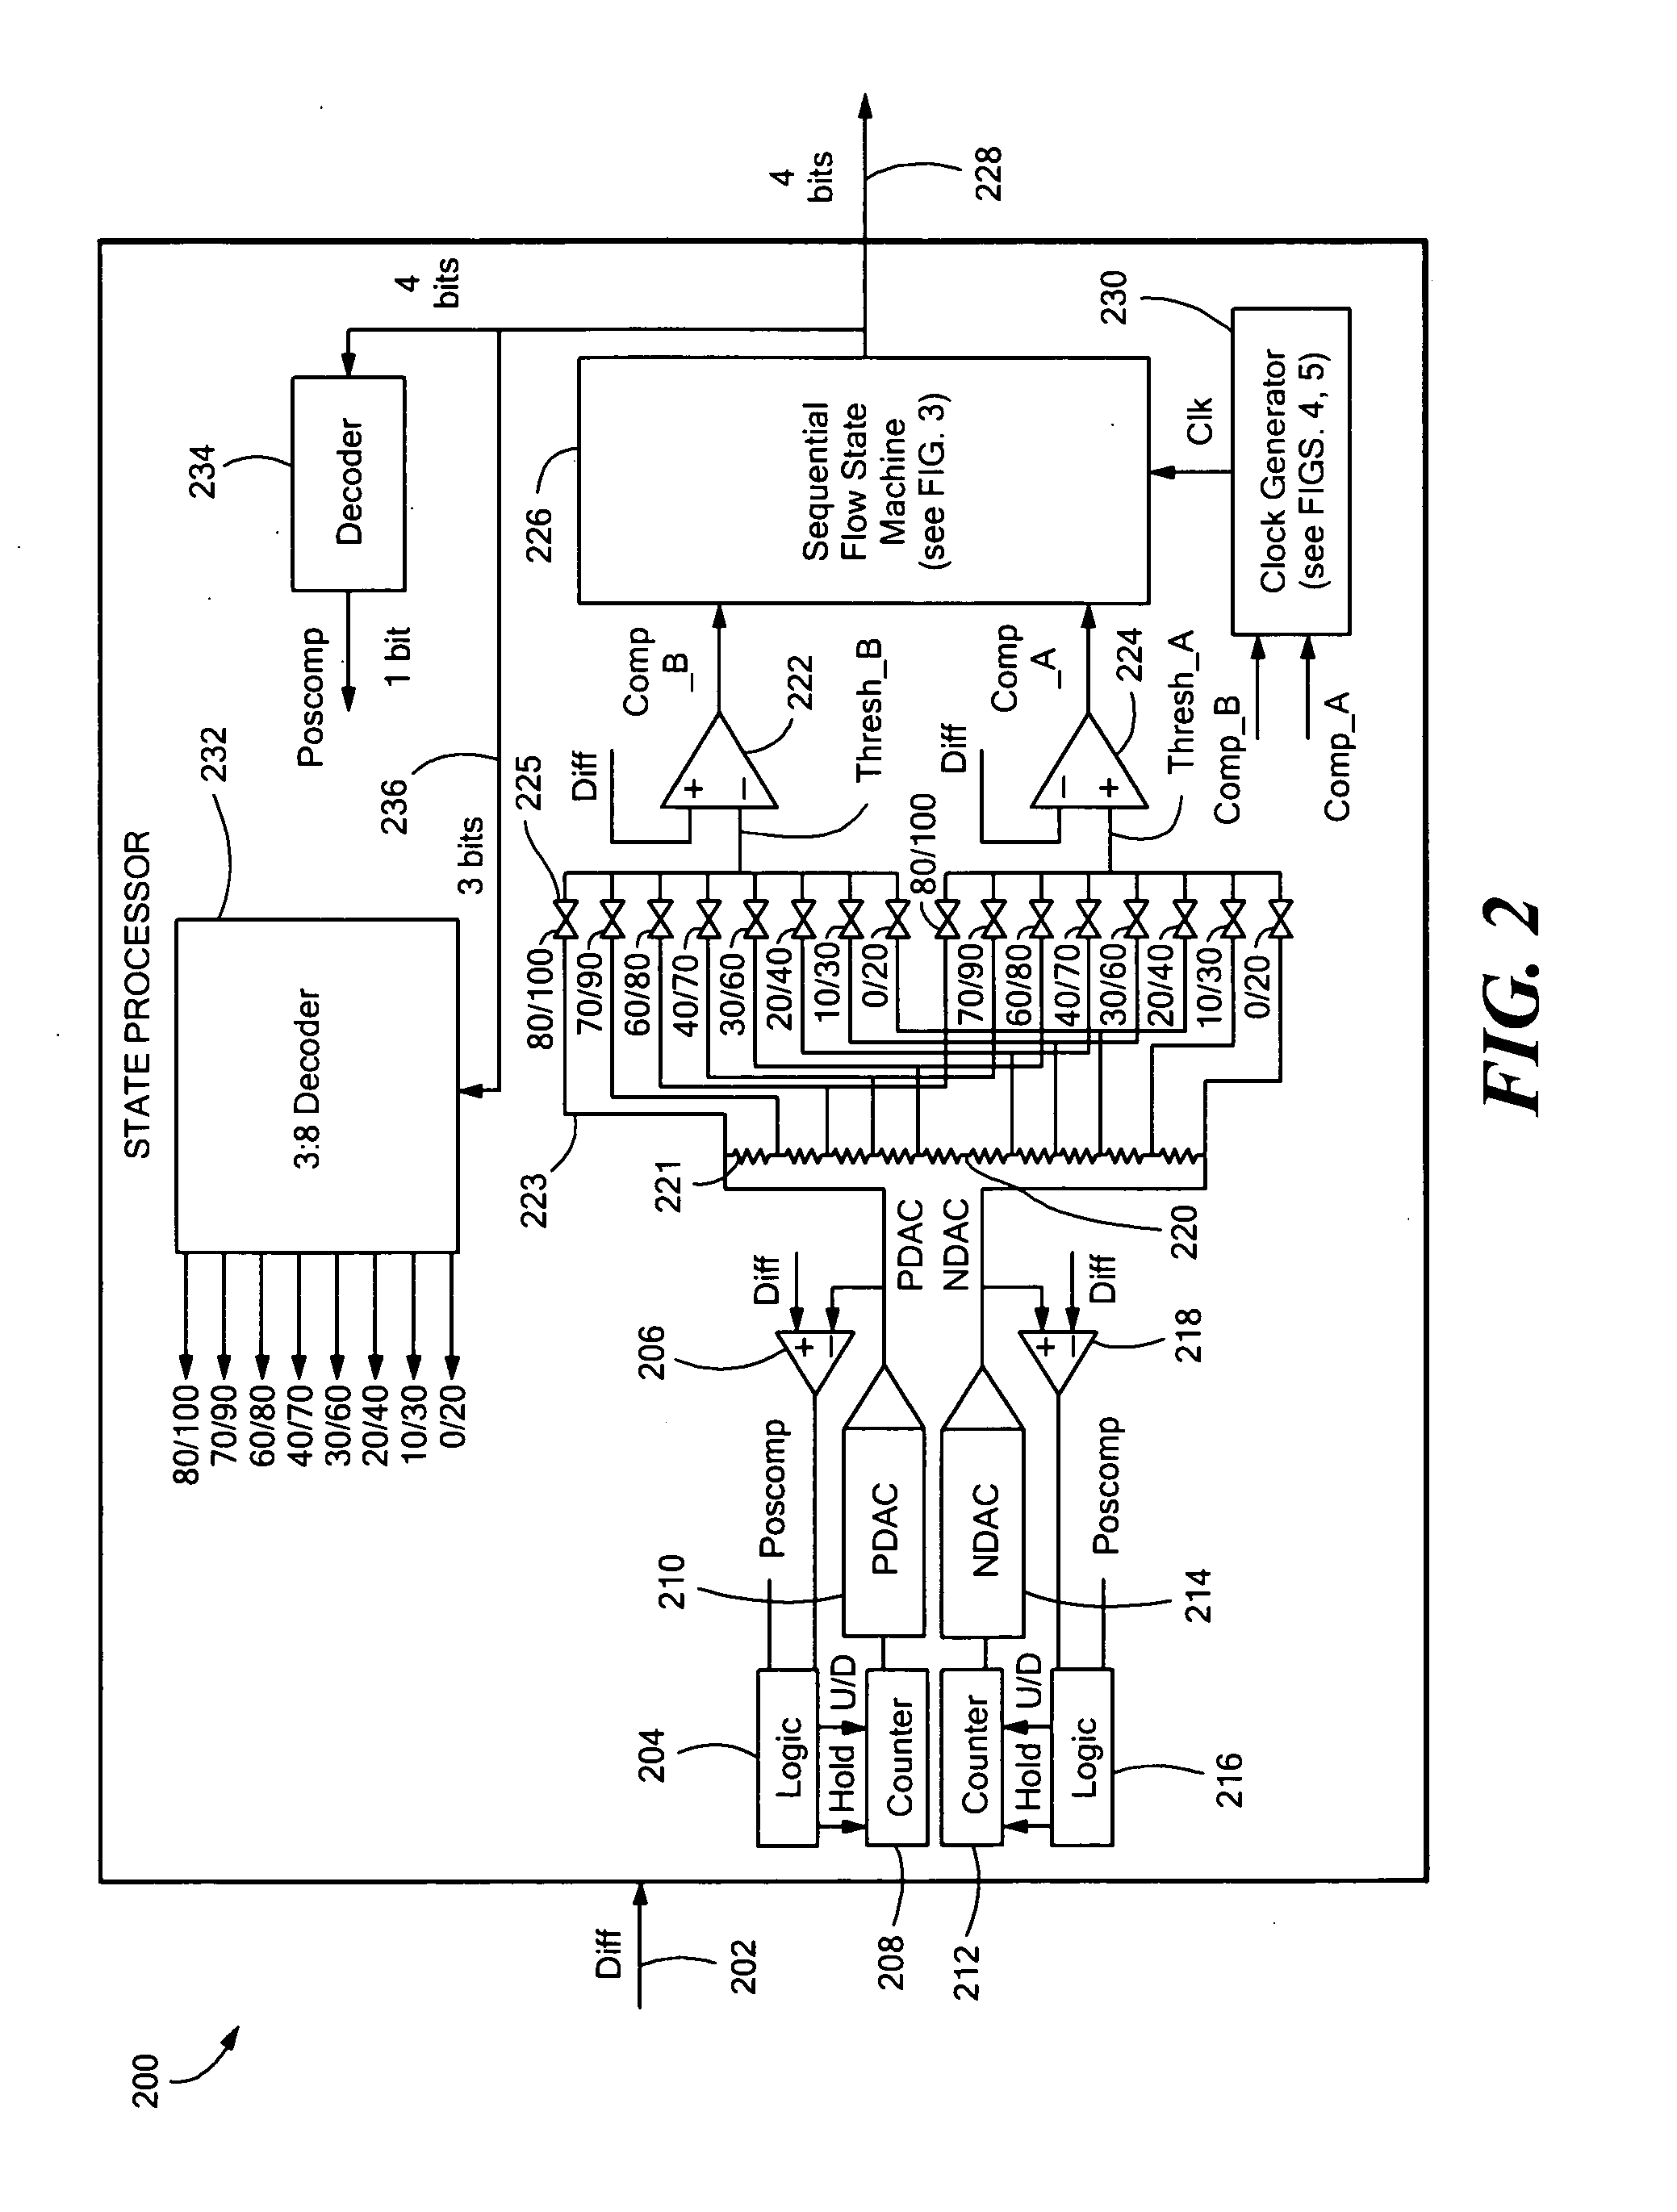 Proximity detector having a sequential flow state machine